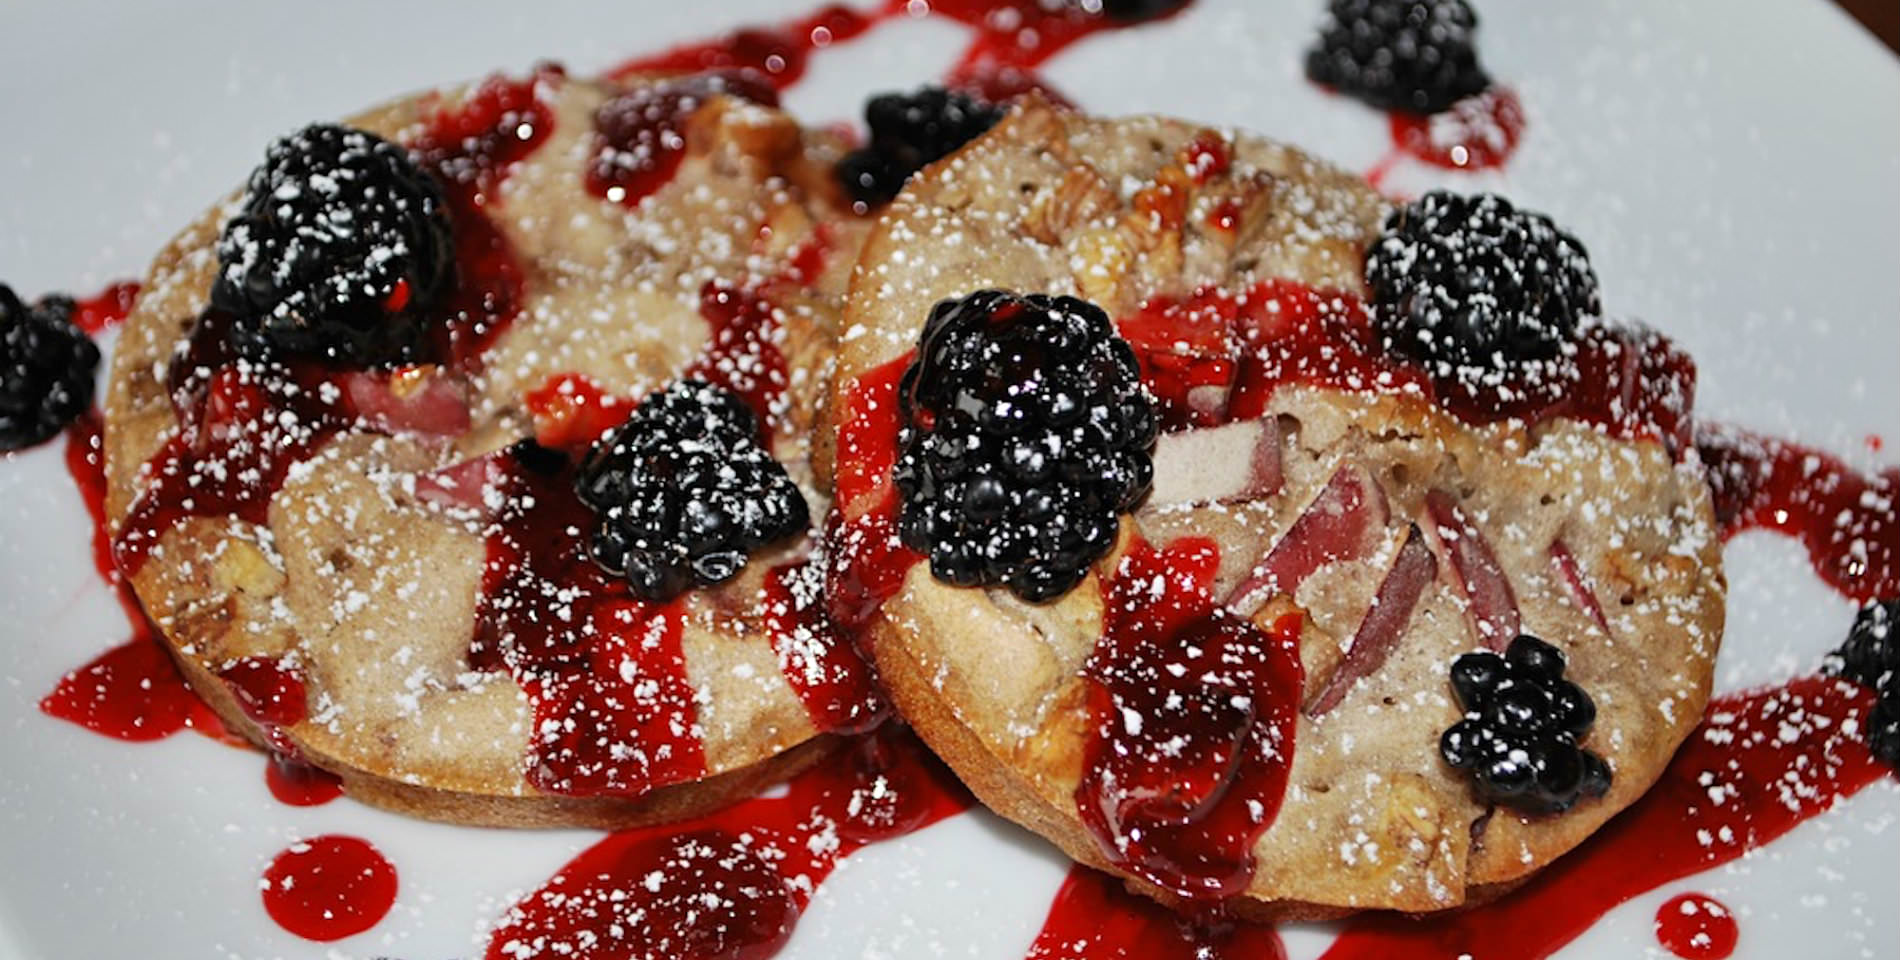 Blackberries and a drizzle of red fruit sauce over biscuits served on a white plate. 